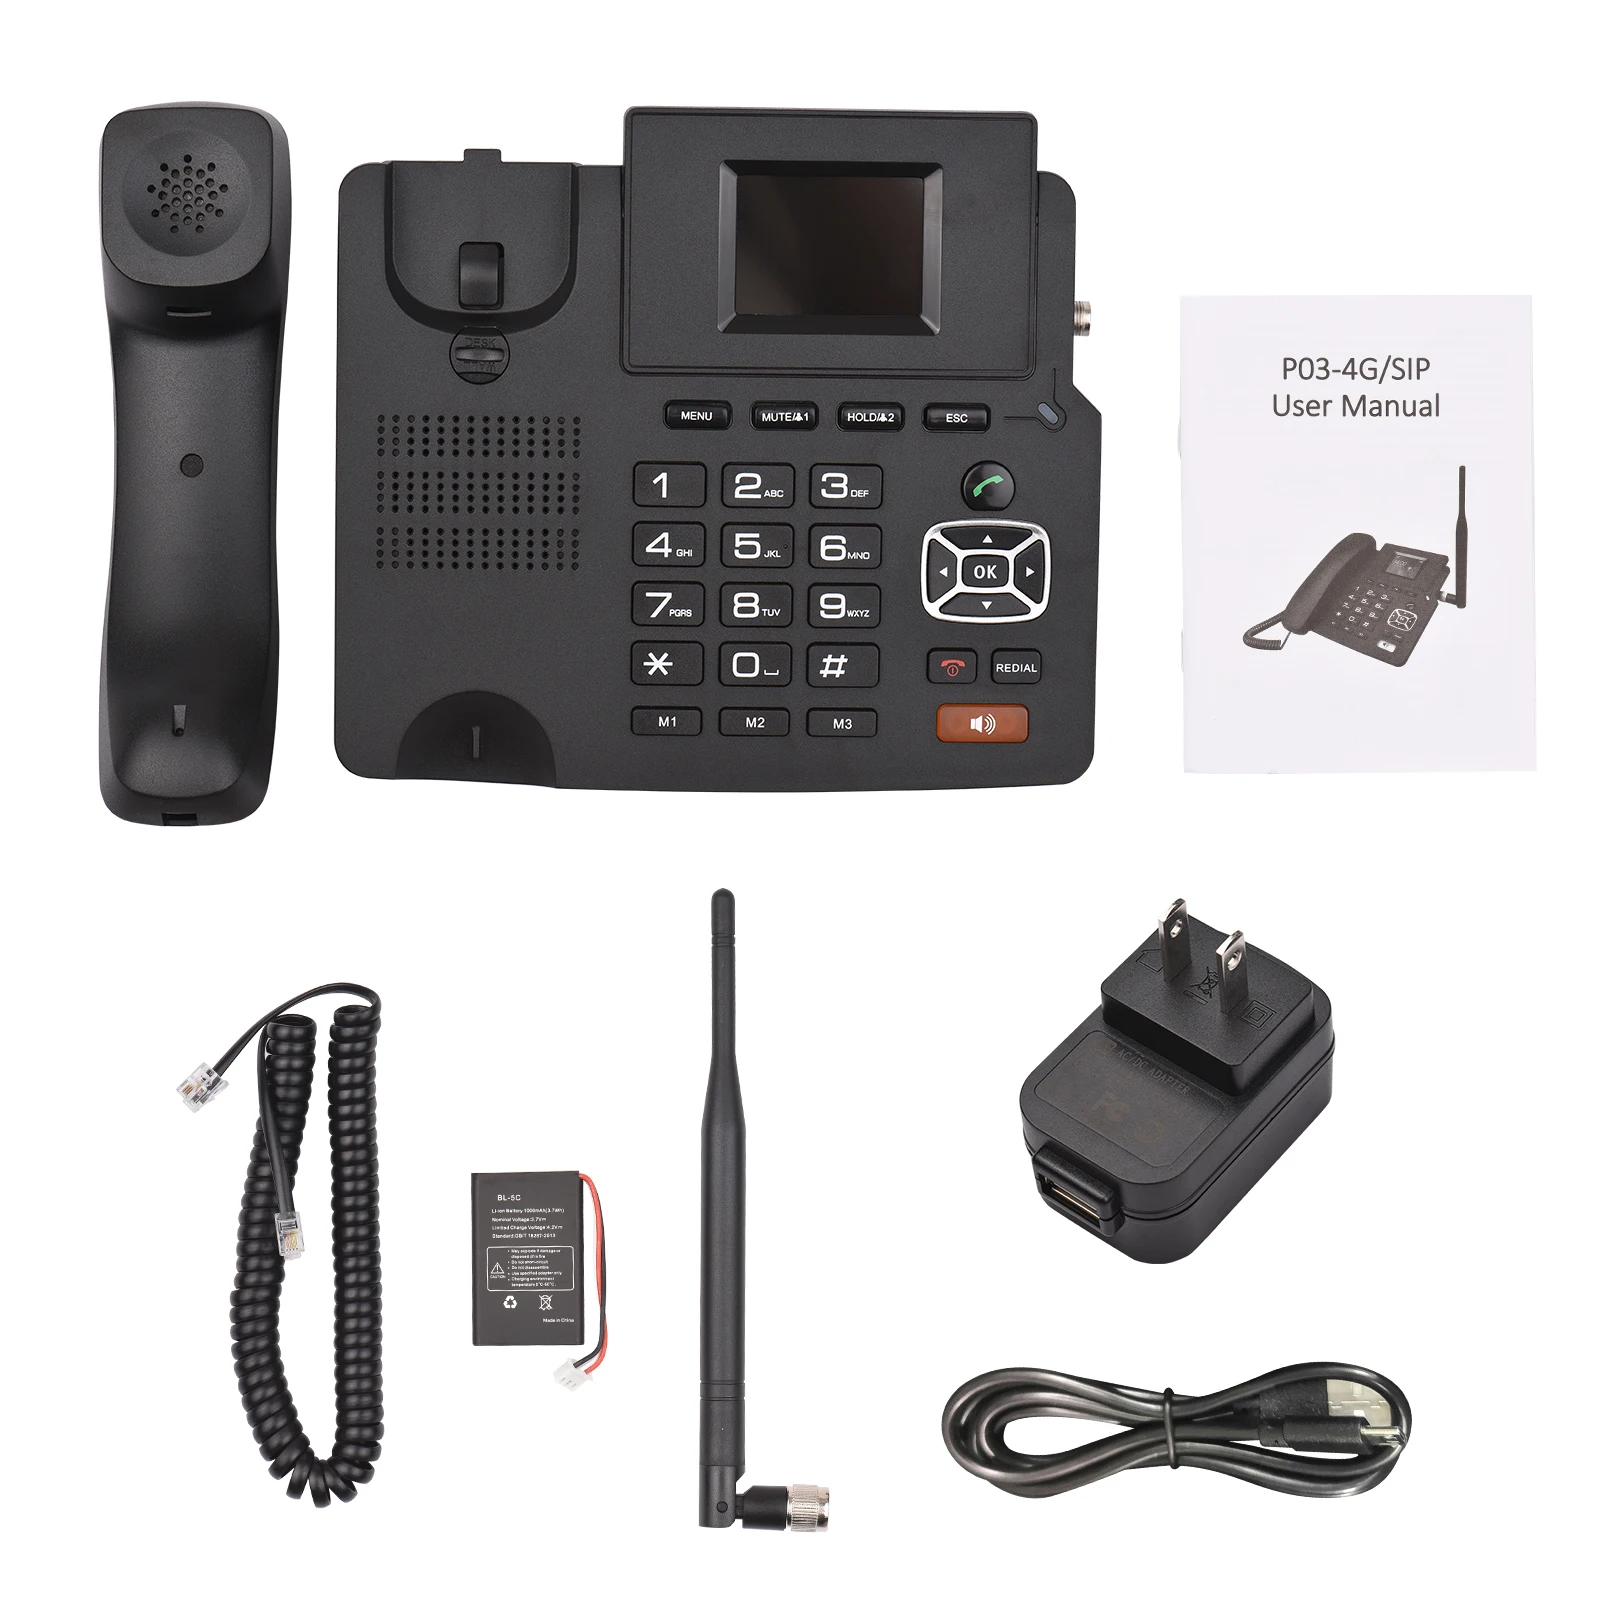 4G Fixed Wireless Telephone VOIP Phone Support 2 SIP Accounts WIFI SIM Card with Antenna LCD Screen Auto Answer images - 6